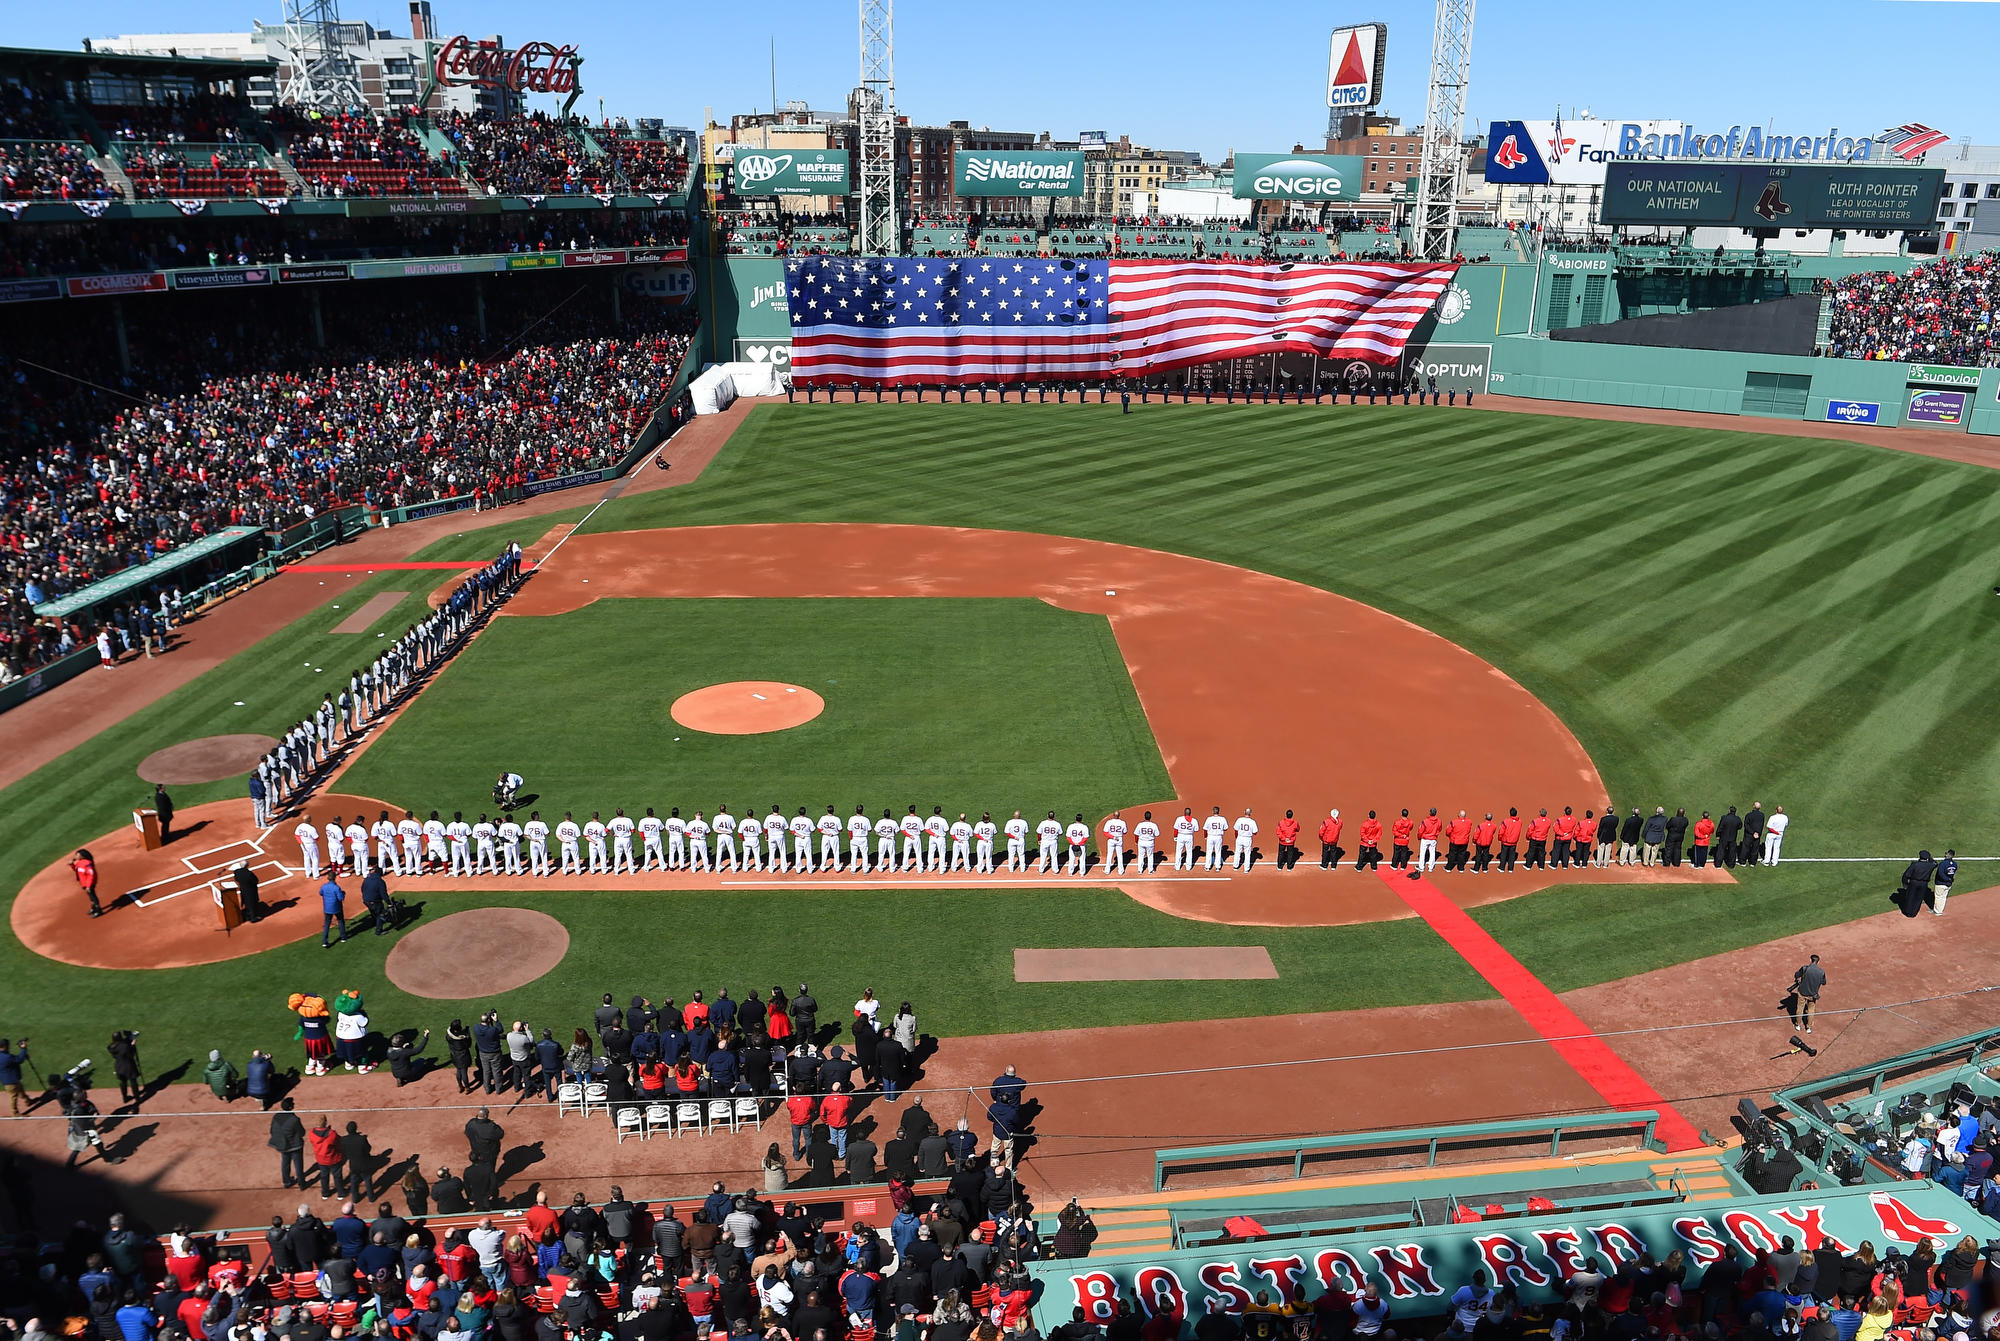 Fans shrug off chilly temps at Red Sox home opener | Boston Herald